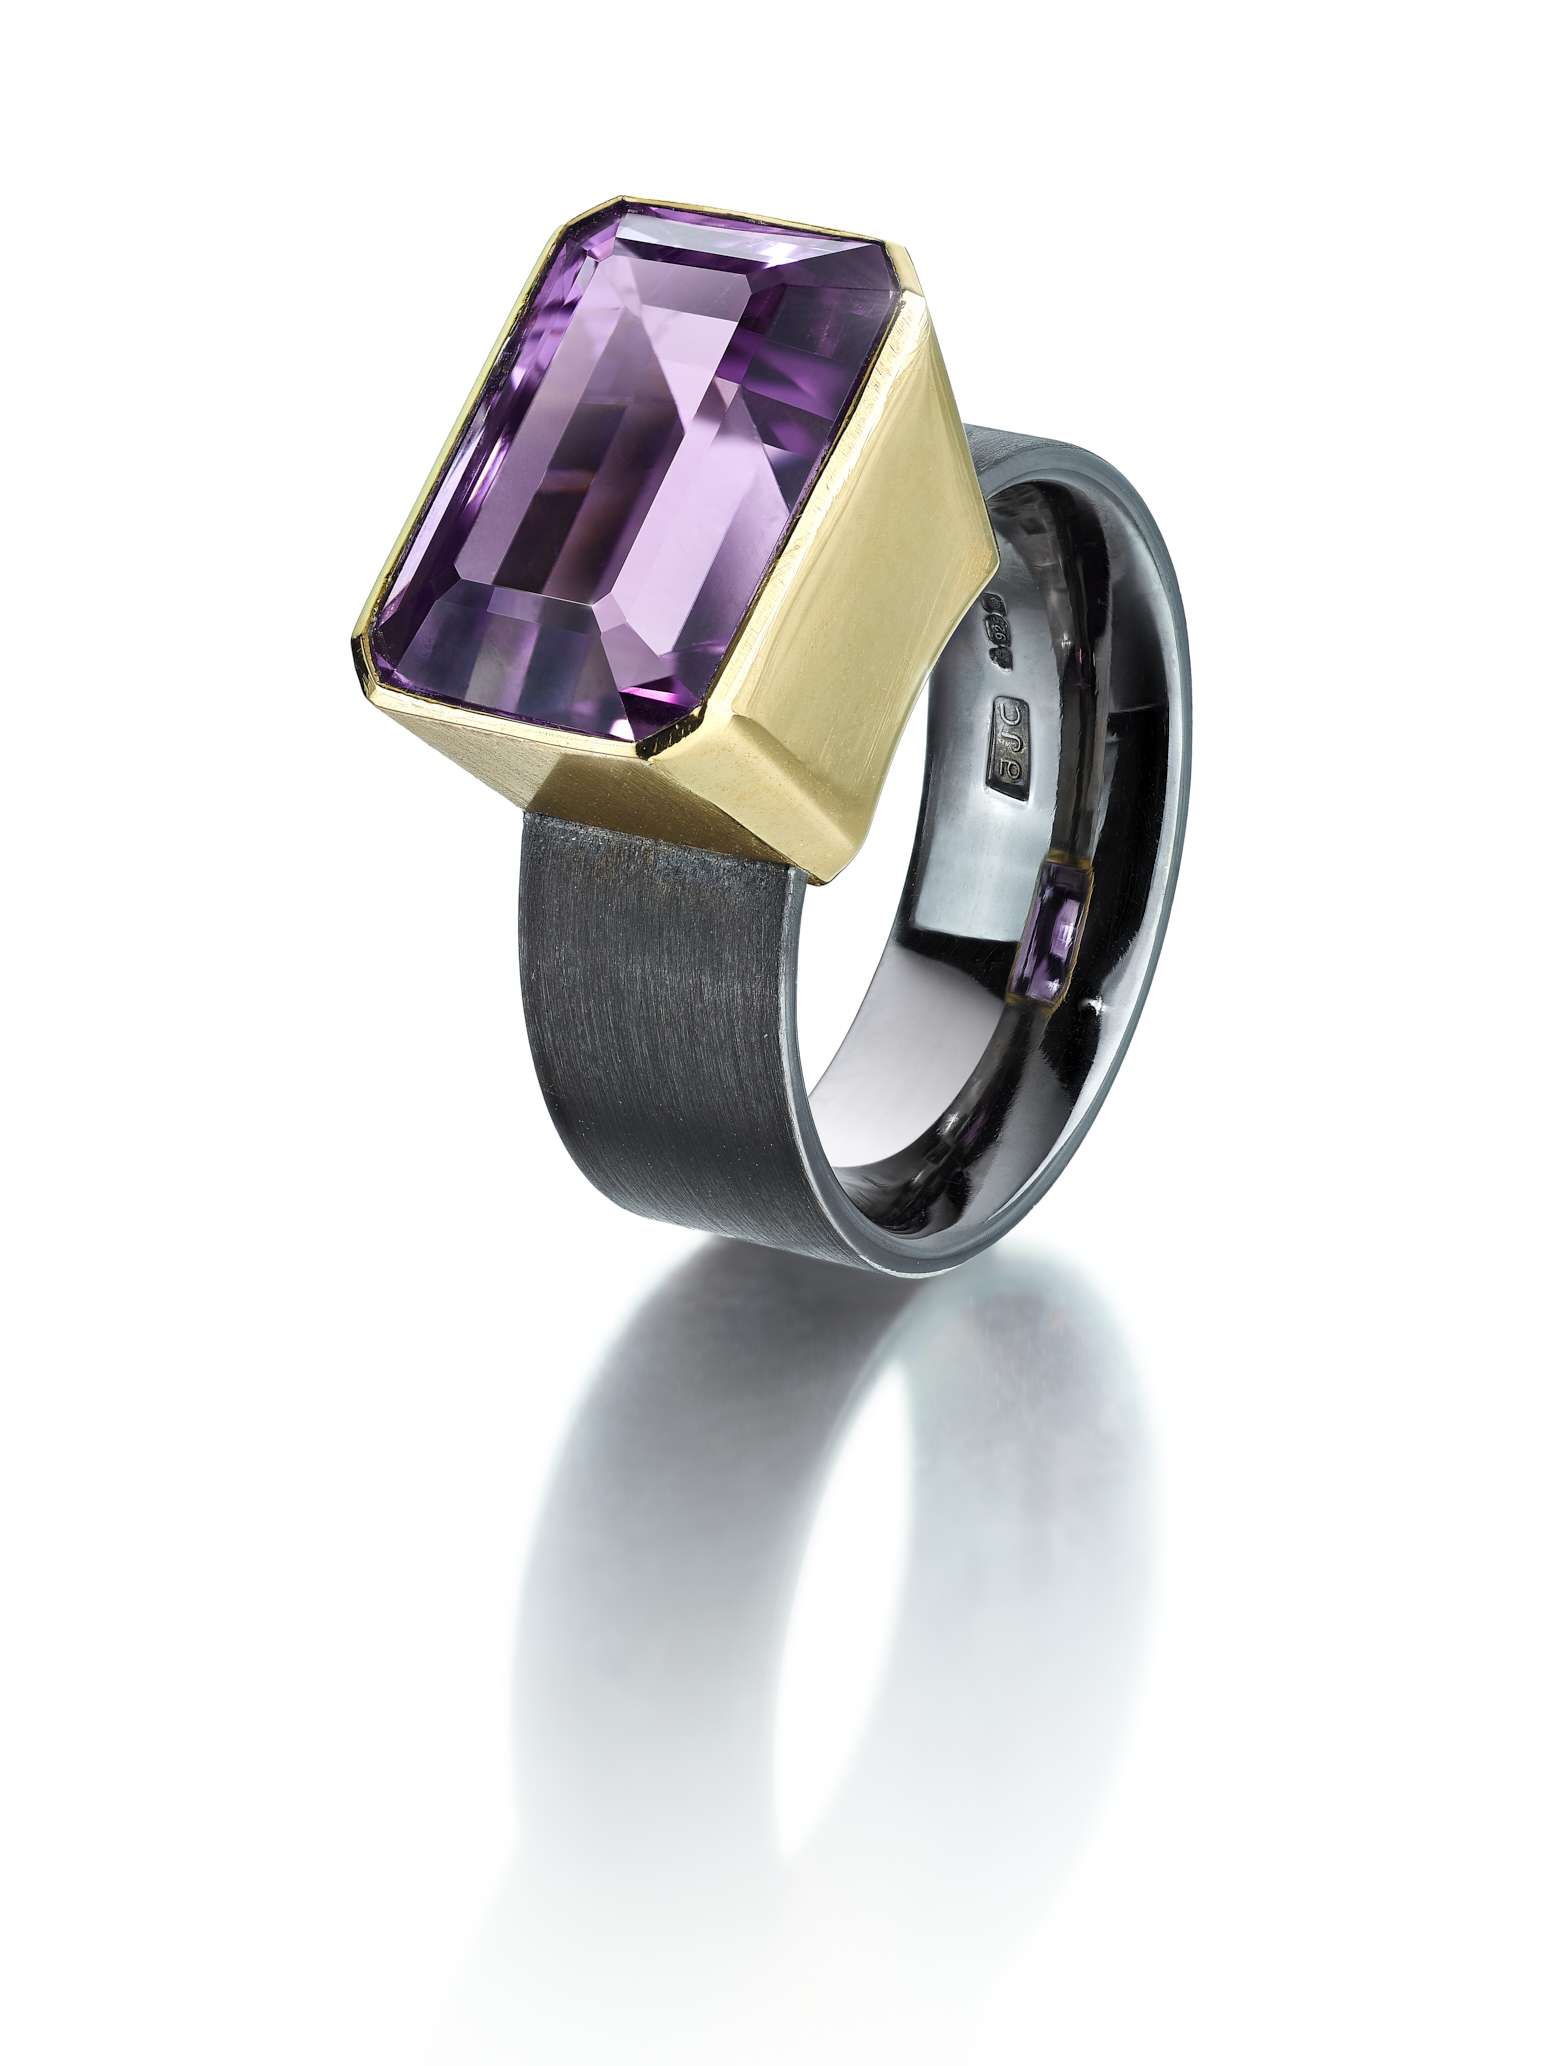 <a href="/node/291">Amethyst Dress Ring size Q. Fine Pale Amethyst set in 18ct gold / Ring shank brushed on the outside and polished inside finished in black rhodium. Photo : Simon B Armitt</a>